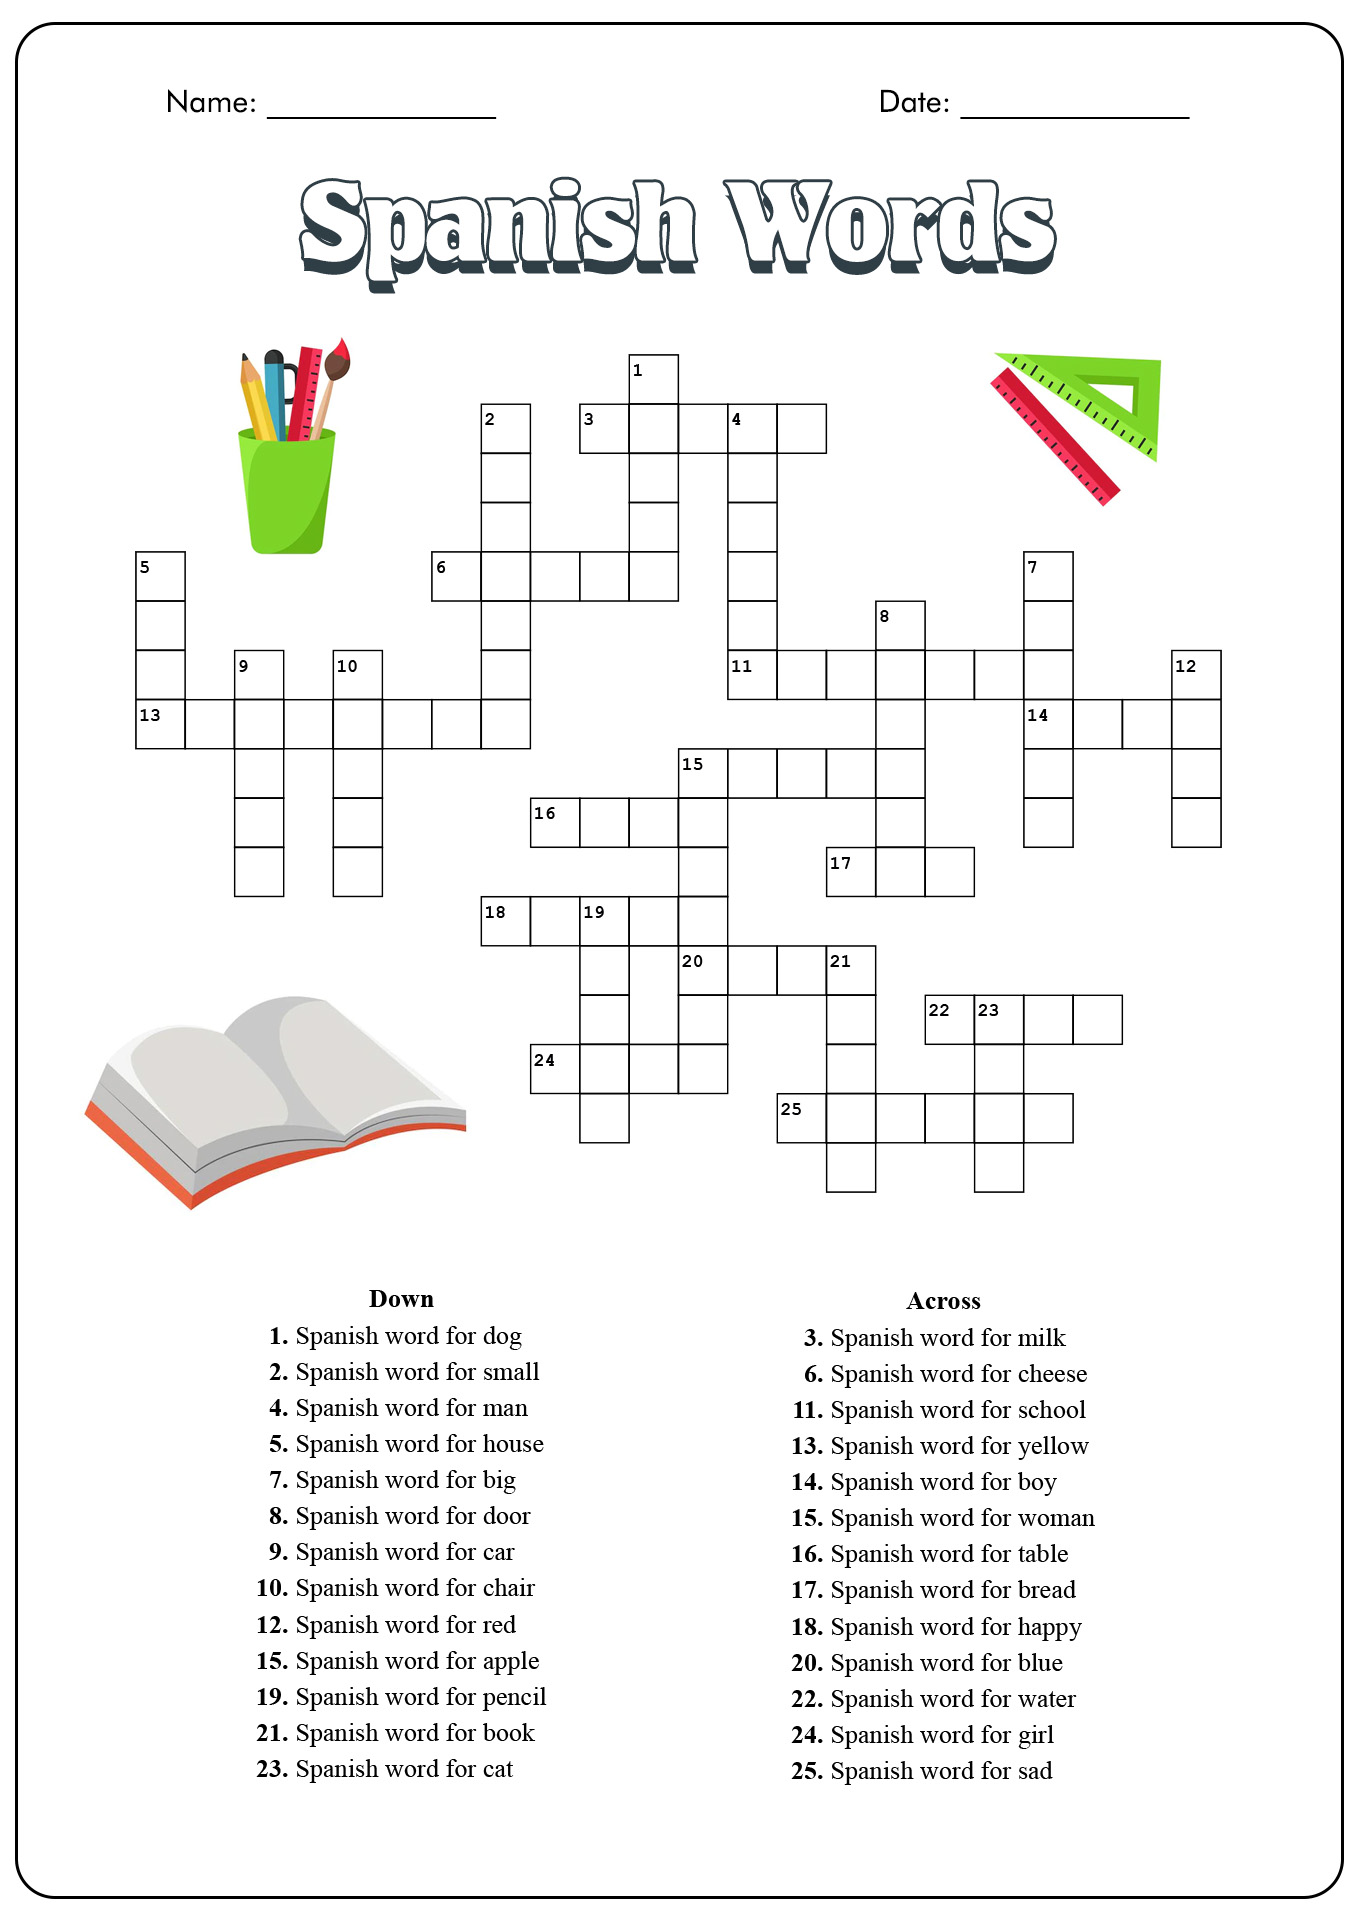 spanish-word-search-printable-printable-word-searches